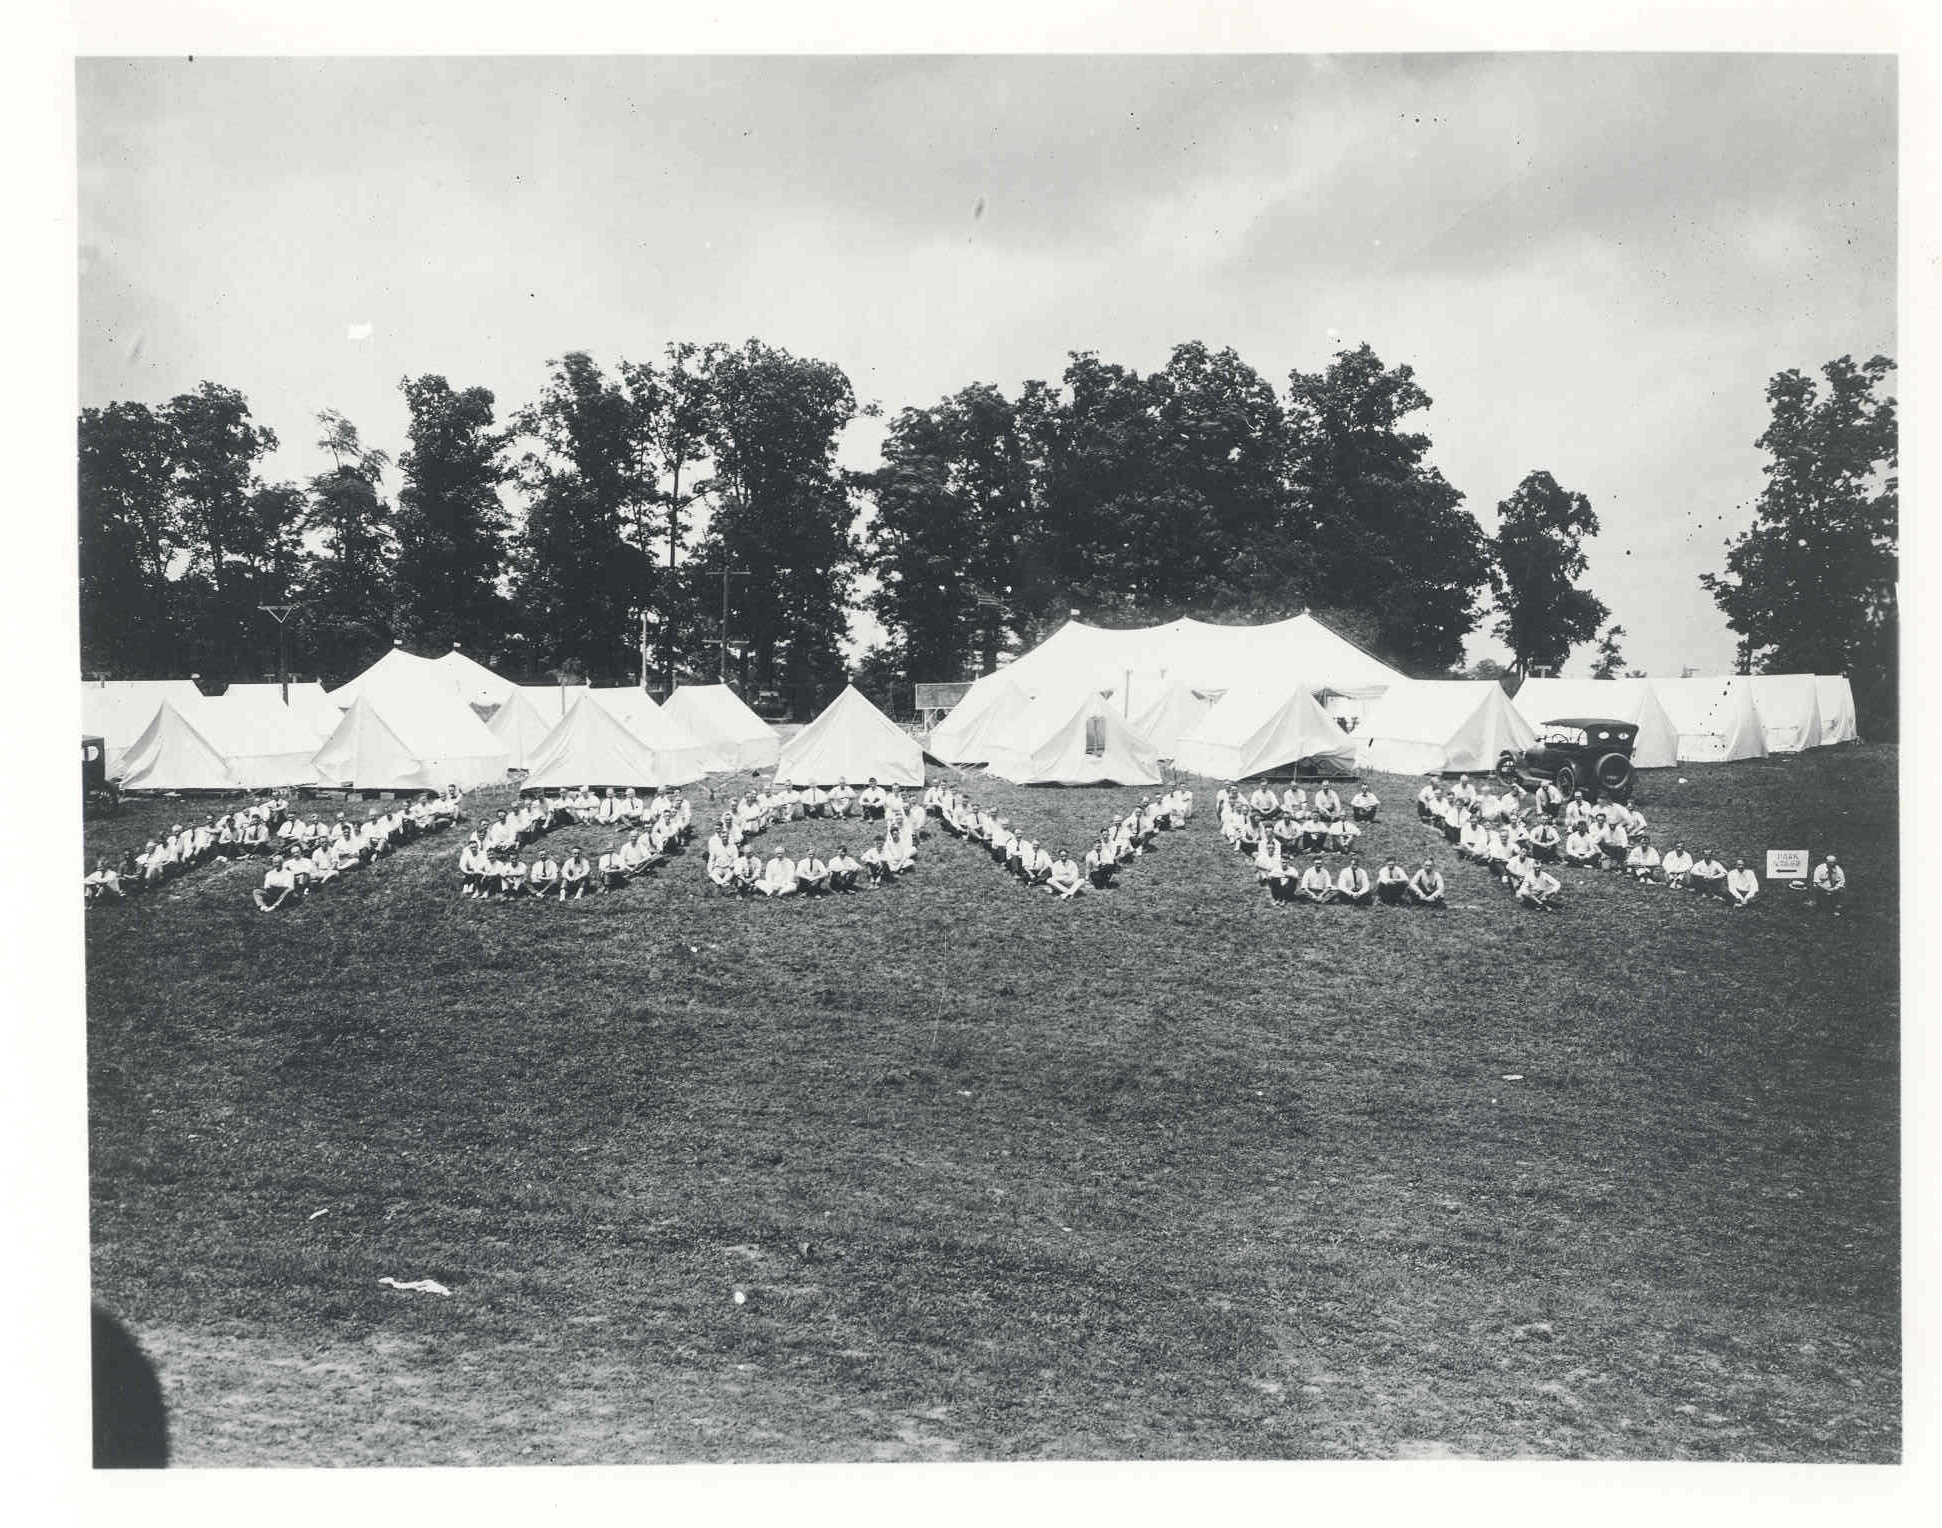 Photo from the 1921 Hoover Convention